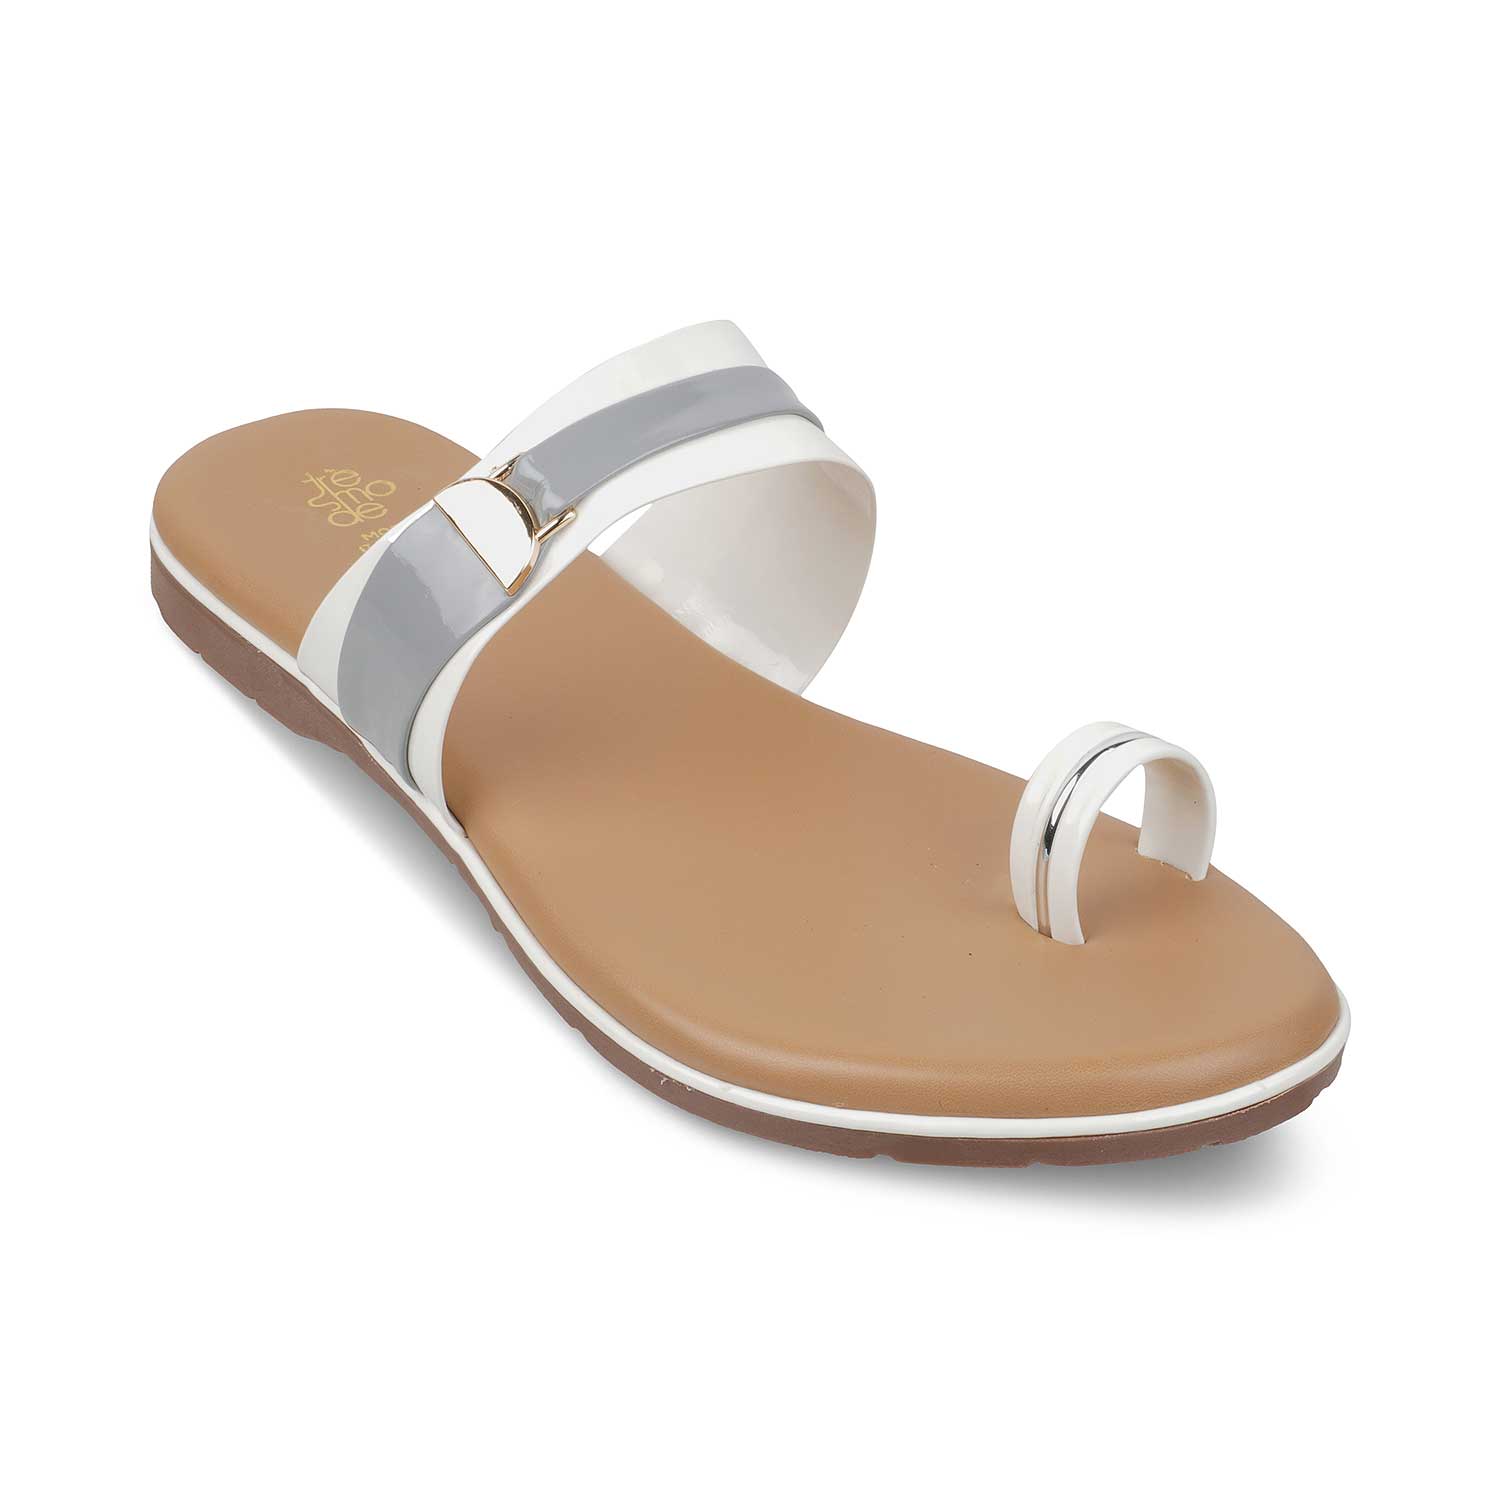 The Jovail White Women's Casual Flats Tresmode